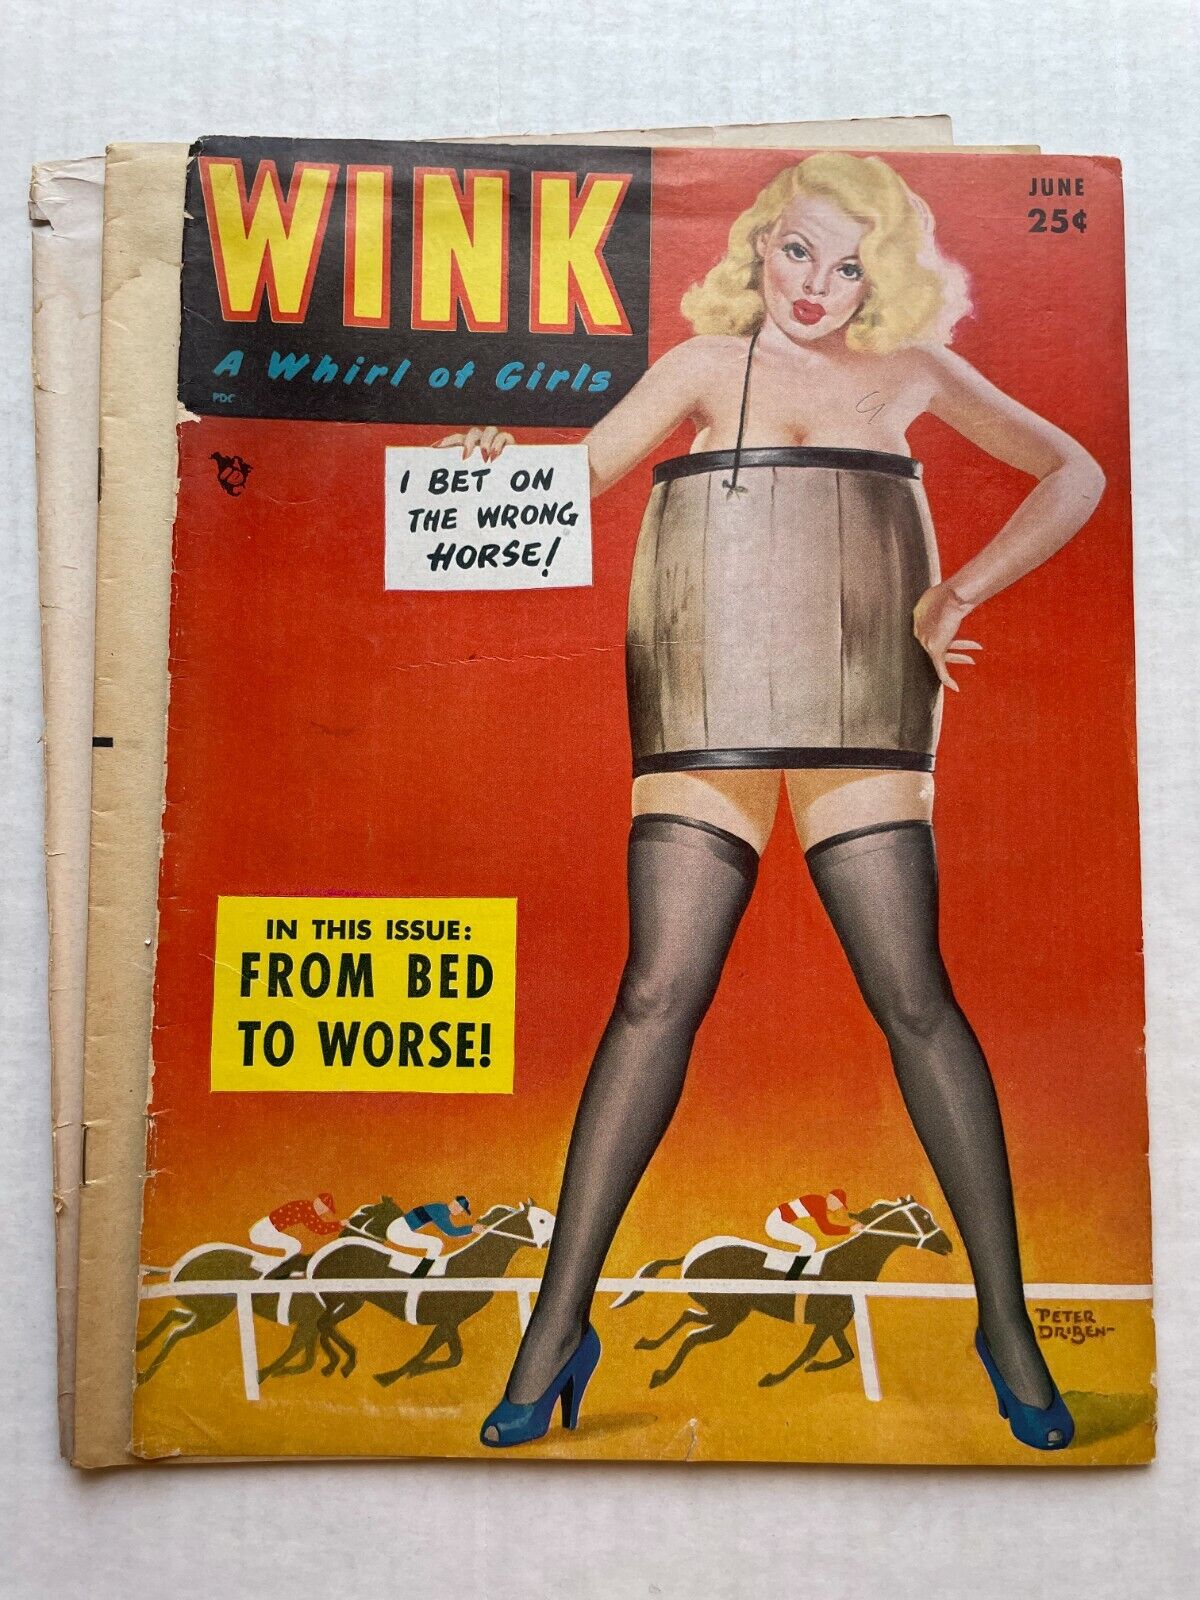 Complete June 1952 Wink Men's Magazine Cover Pinup Girl by Peter Driben